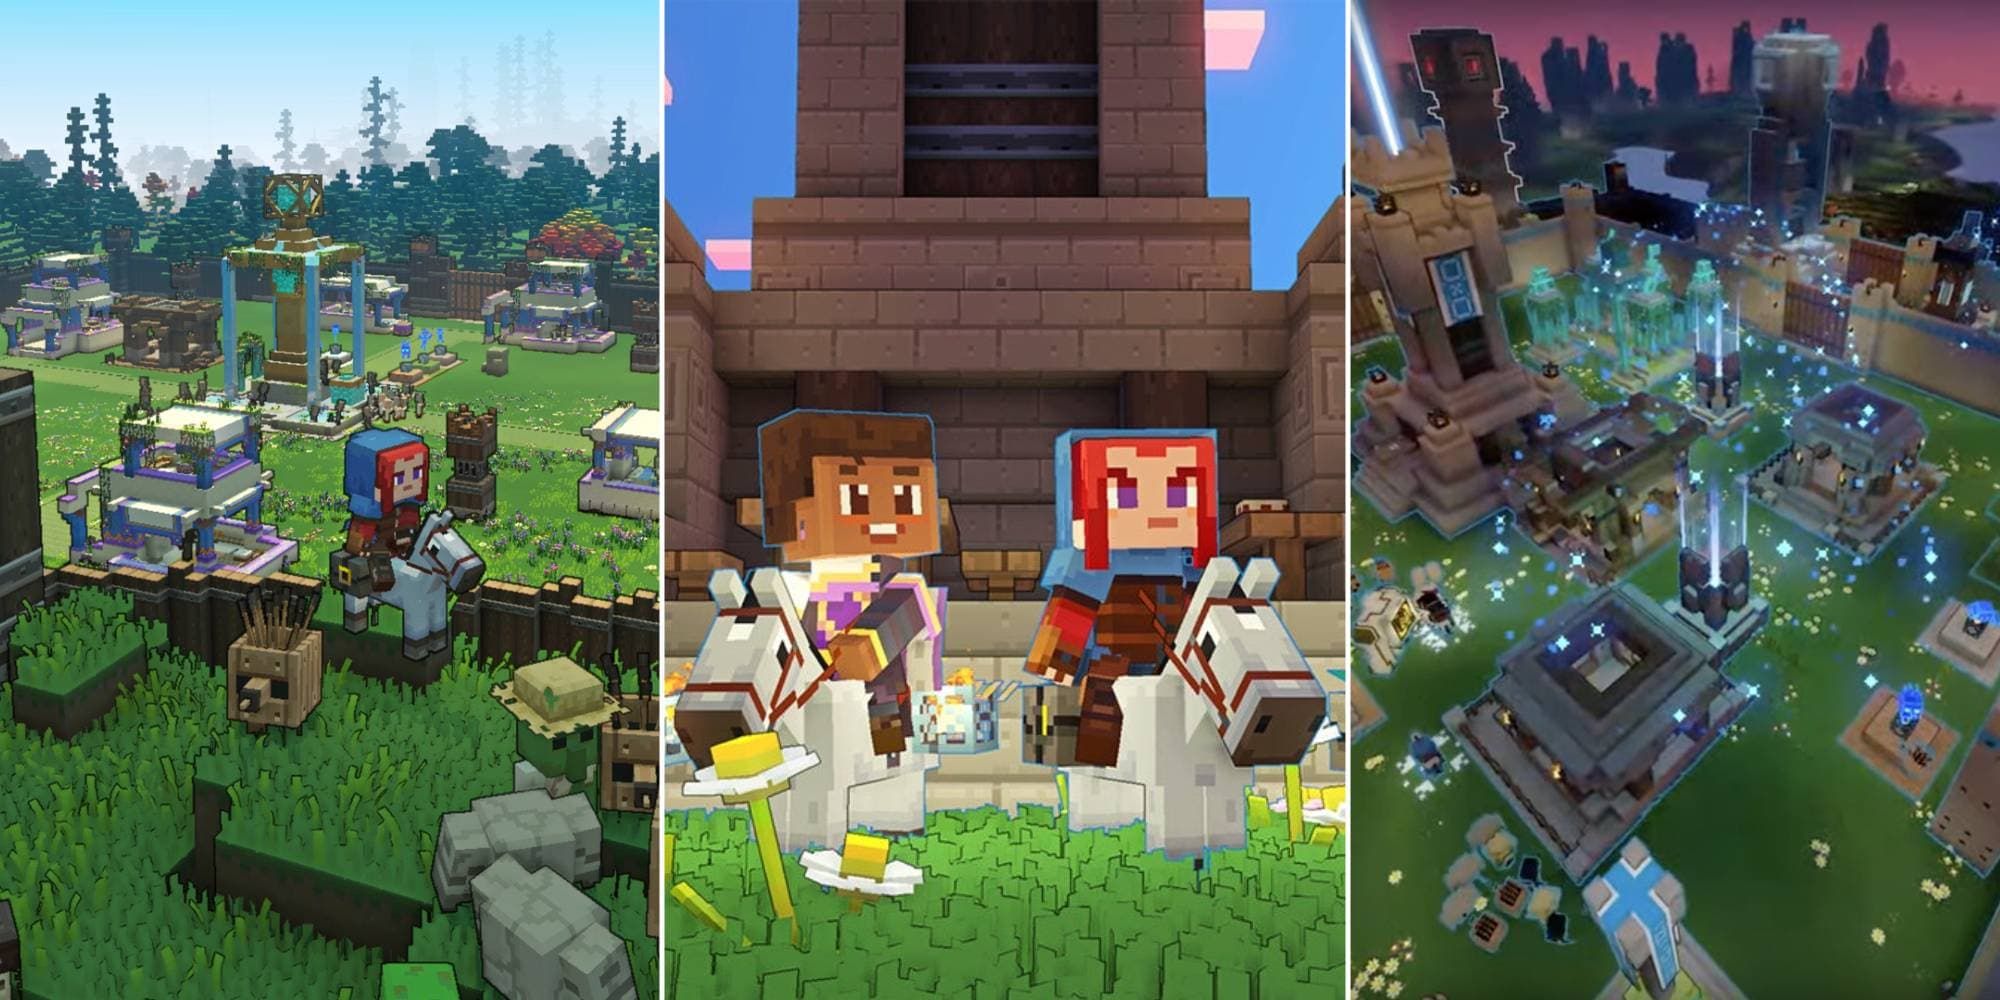 A hero rides a mount, two heroes are in co-op multiplayer, and a village is being defended in Minecraft Legends.